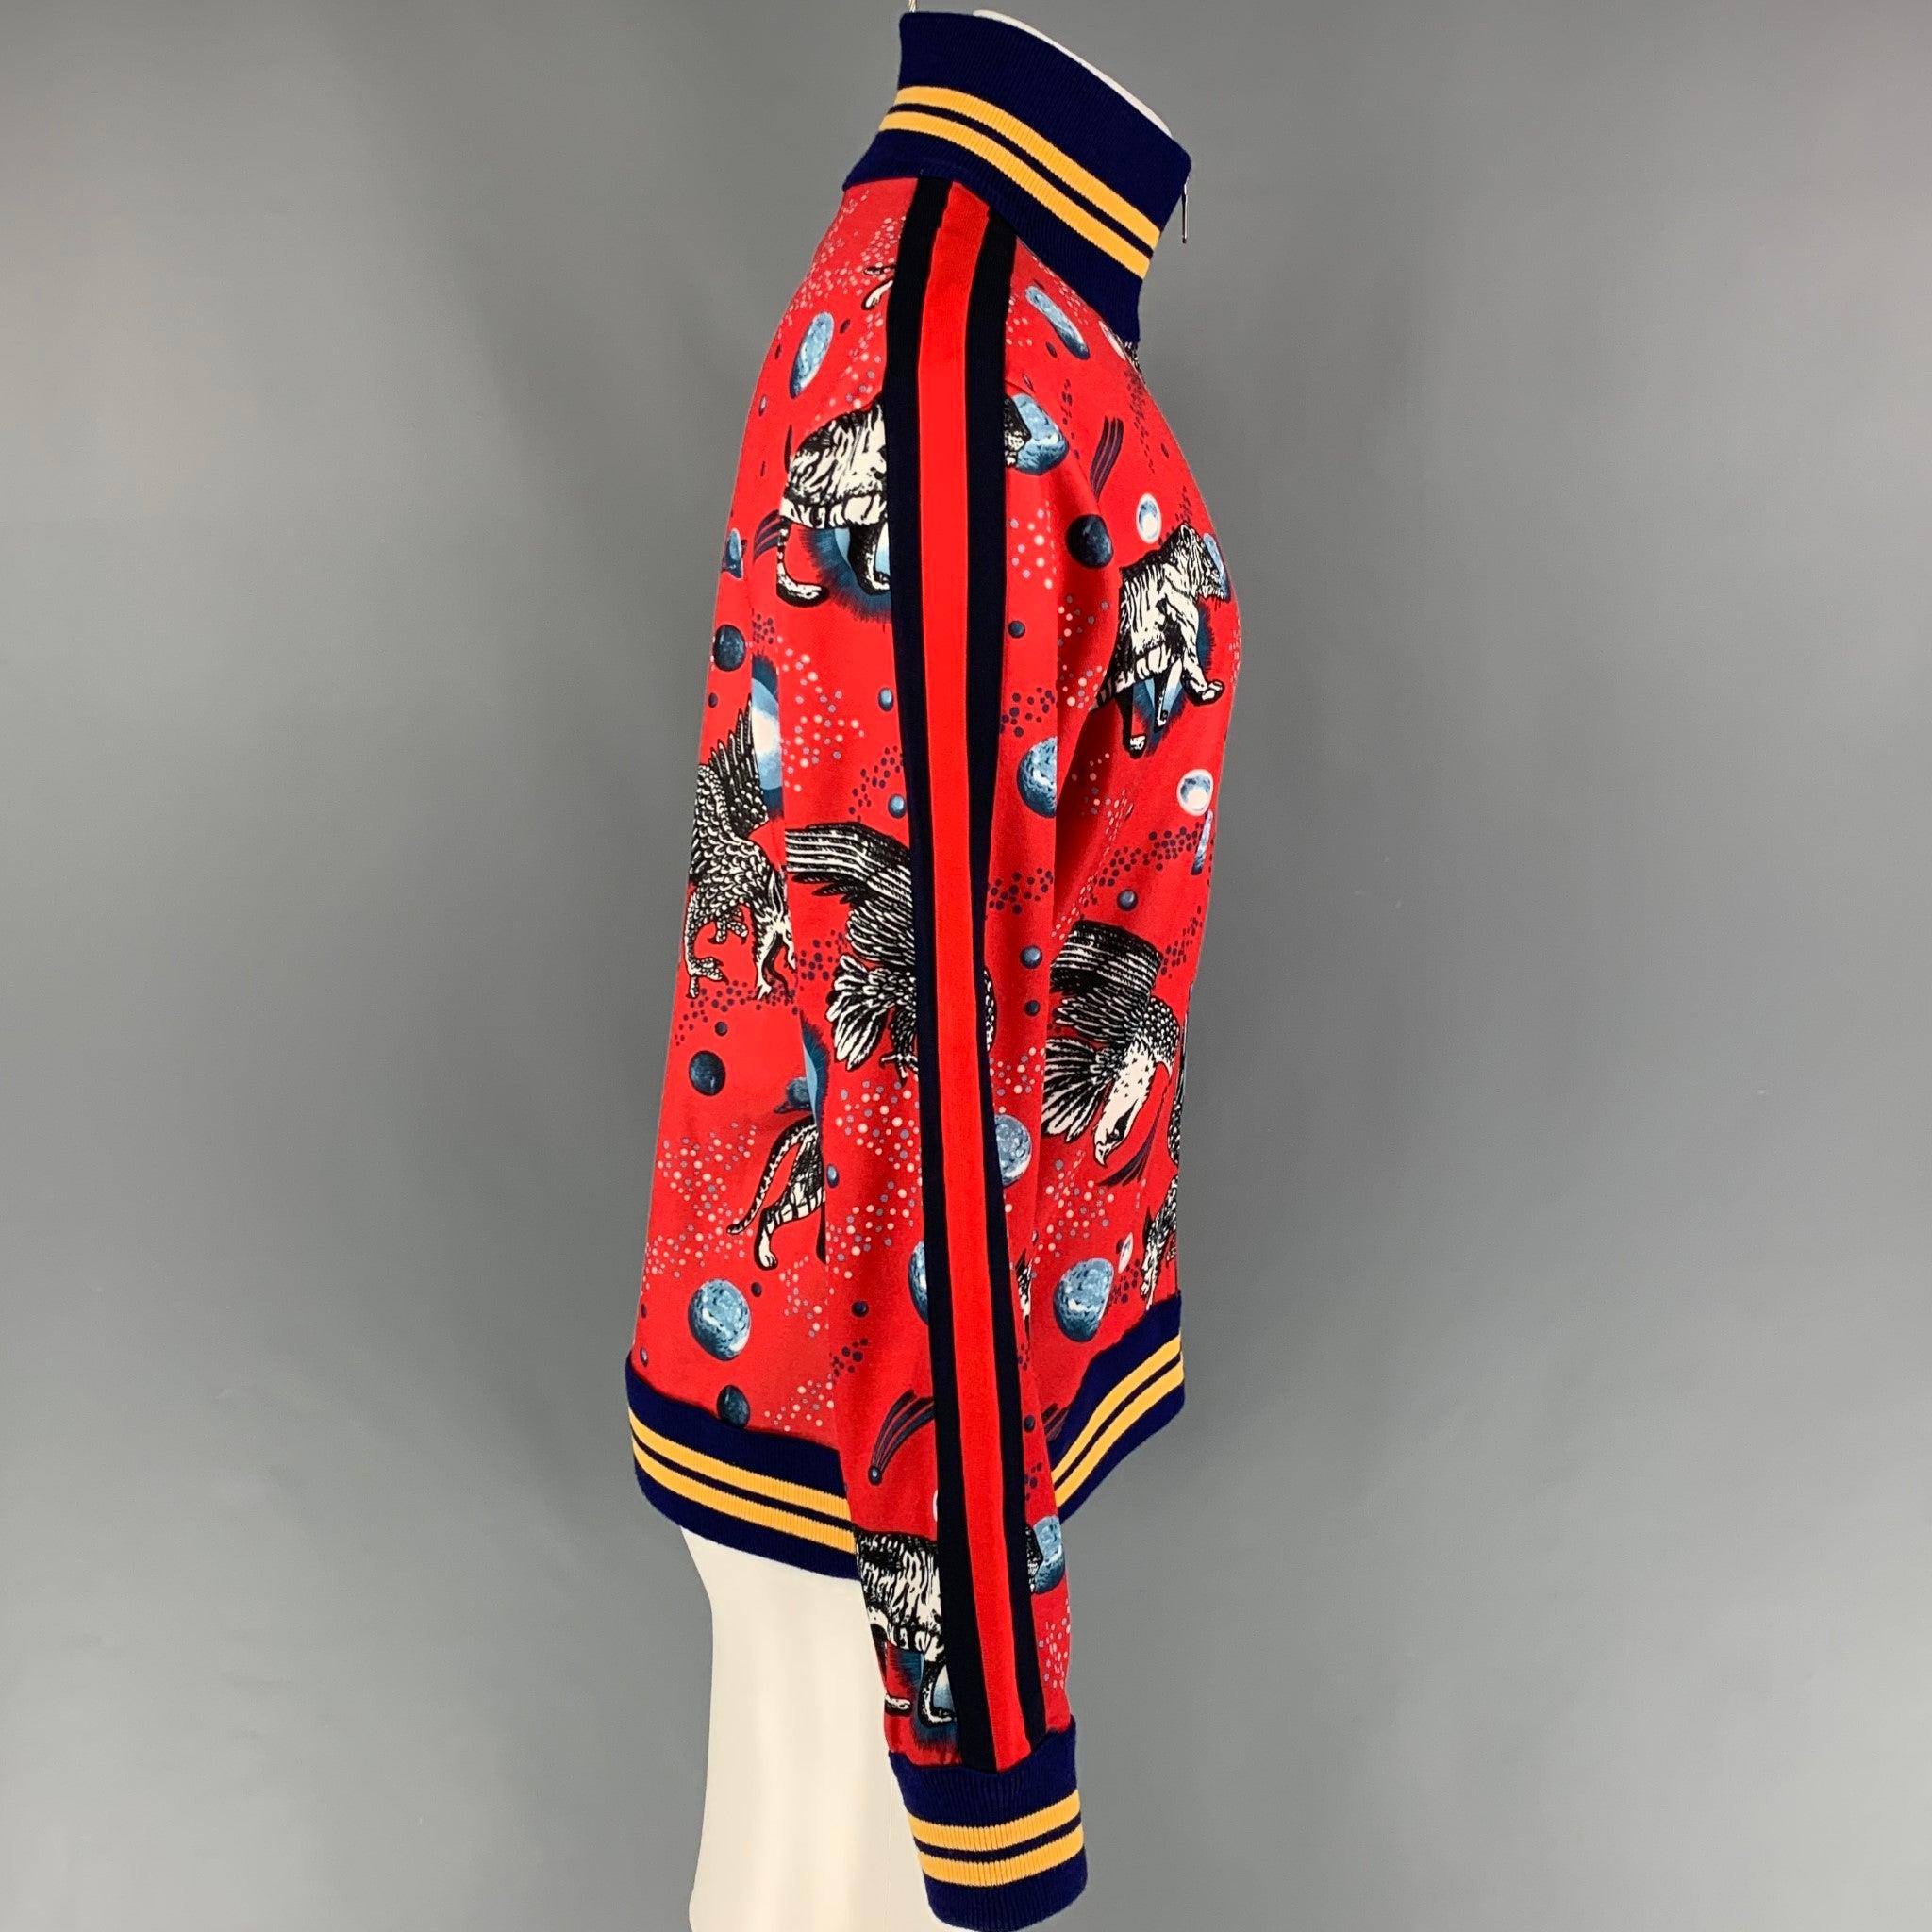 GUCCI by Alessandro Michele FW 17 jacket comes in a red 'space animal' graphic print featuring a high collar, striped ribbed hem, slit pockets, and a full zip up closure. Made in Italy.
Excellent
Pre-Owned Condition. 

Marked:   M  

Measurements: 
